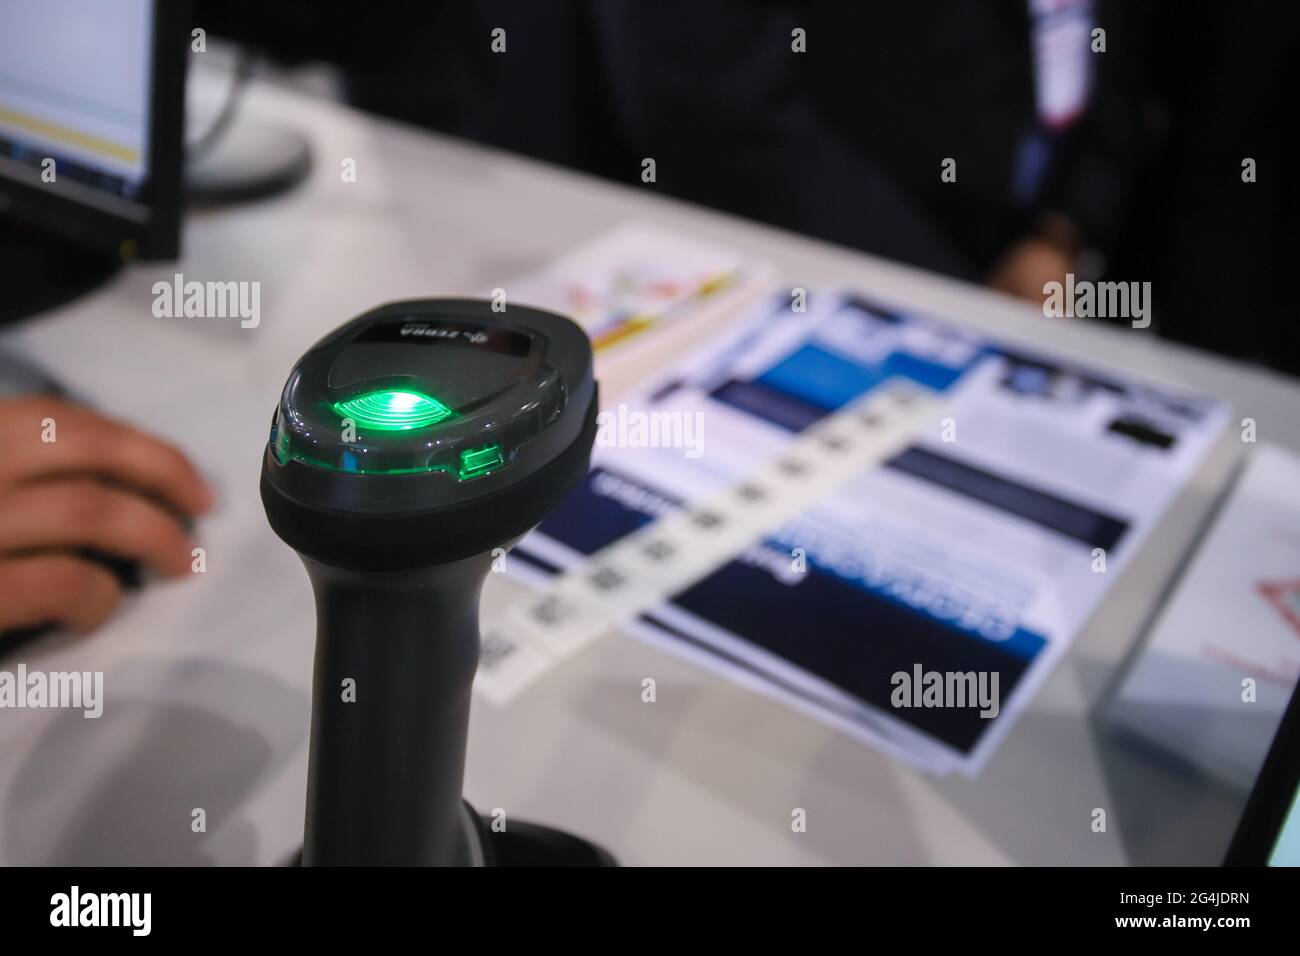 Minsk. Belarus - 1.06.2021: Barcode scanner at the stand within the framework of the TIBO exhibition in Minsk. Stock Photo